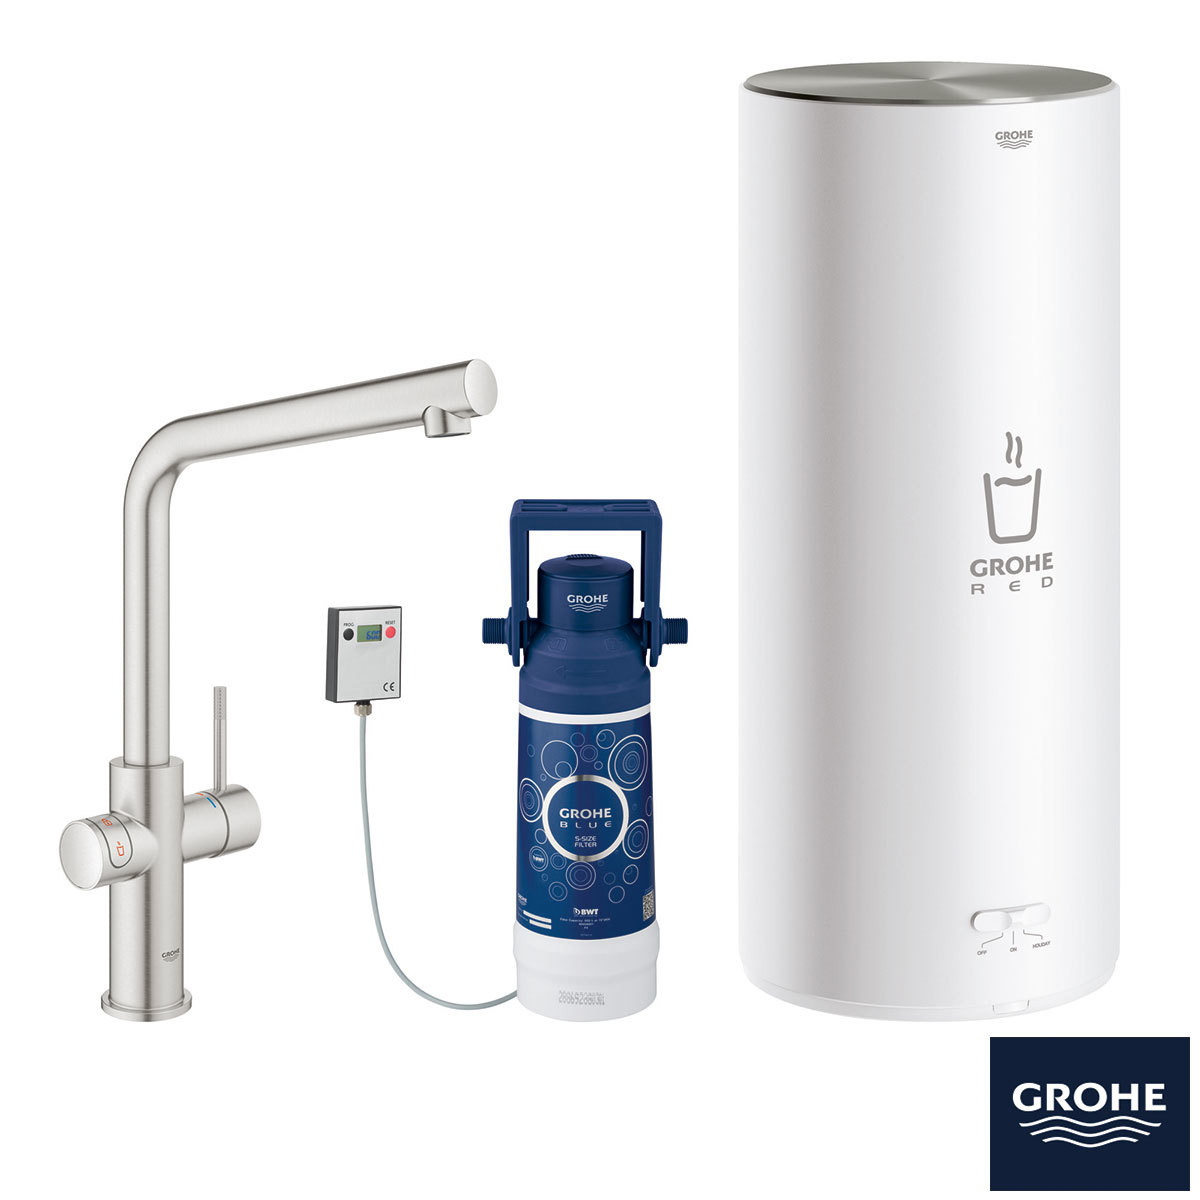 Grohe Red Duo 3 In 1 Instant Steaming Hot Water Filter Kitchen Tap